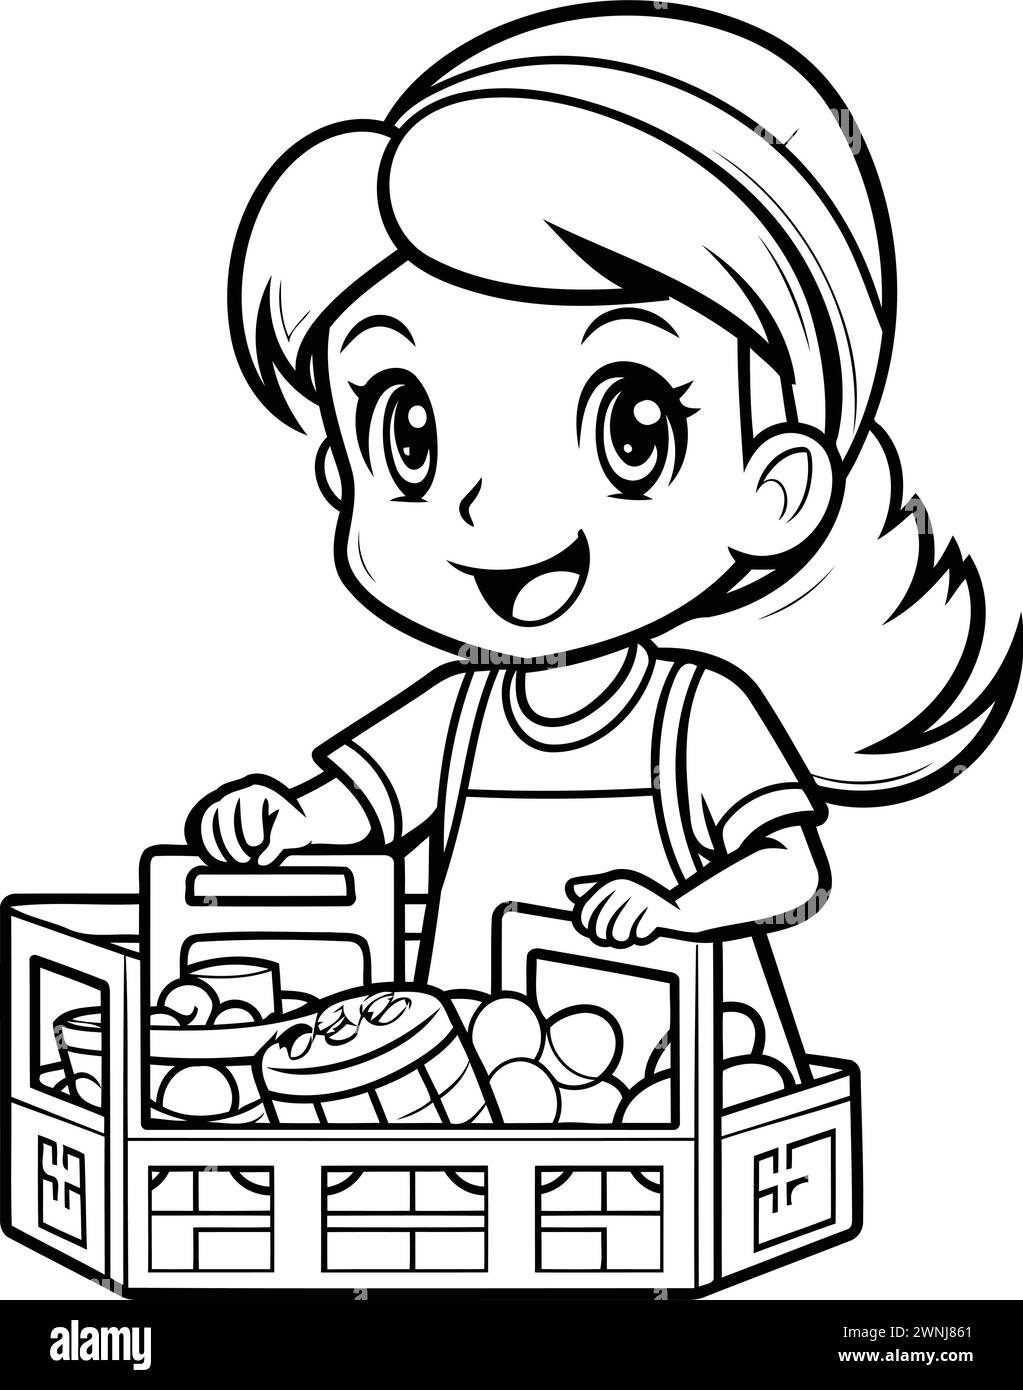 Black and White Cartoon Illustration of Cute Little Girl Shopping for a Basket of Food Coloring Book Stock Vector